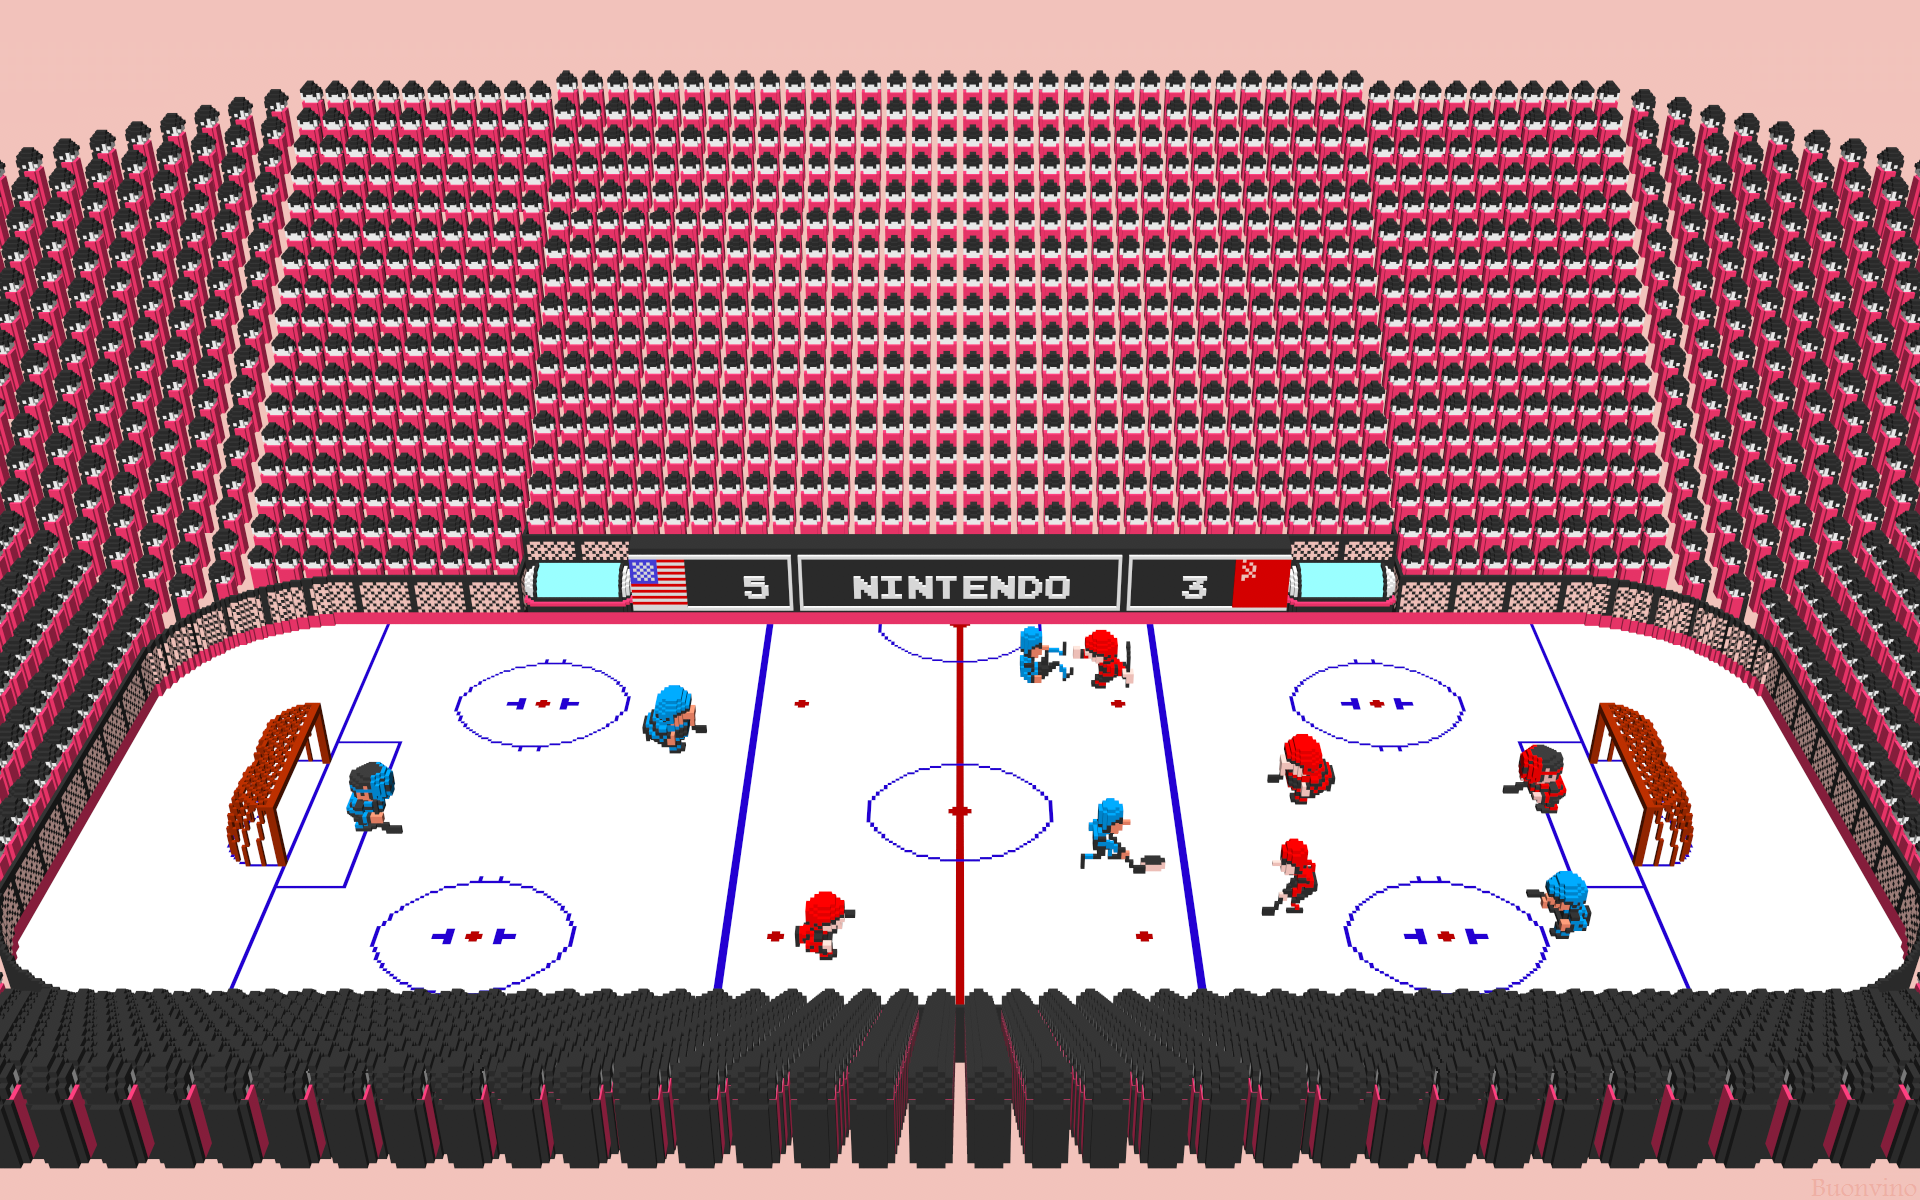 "Ice Hockey" (NES) 1988 by published by Nintendo